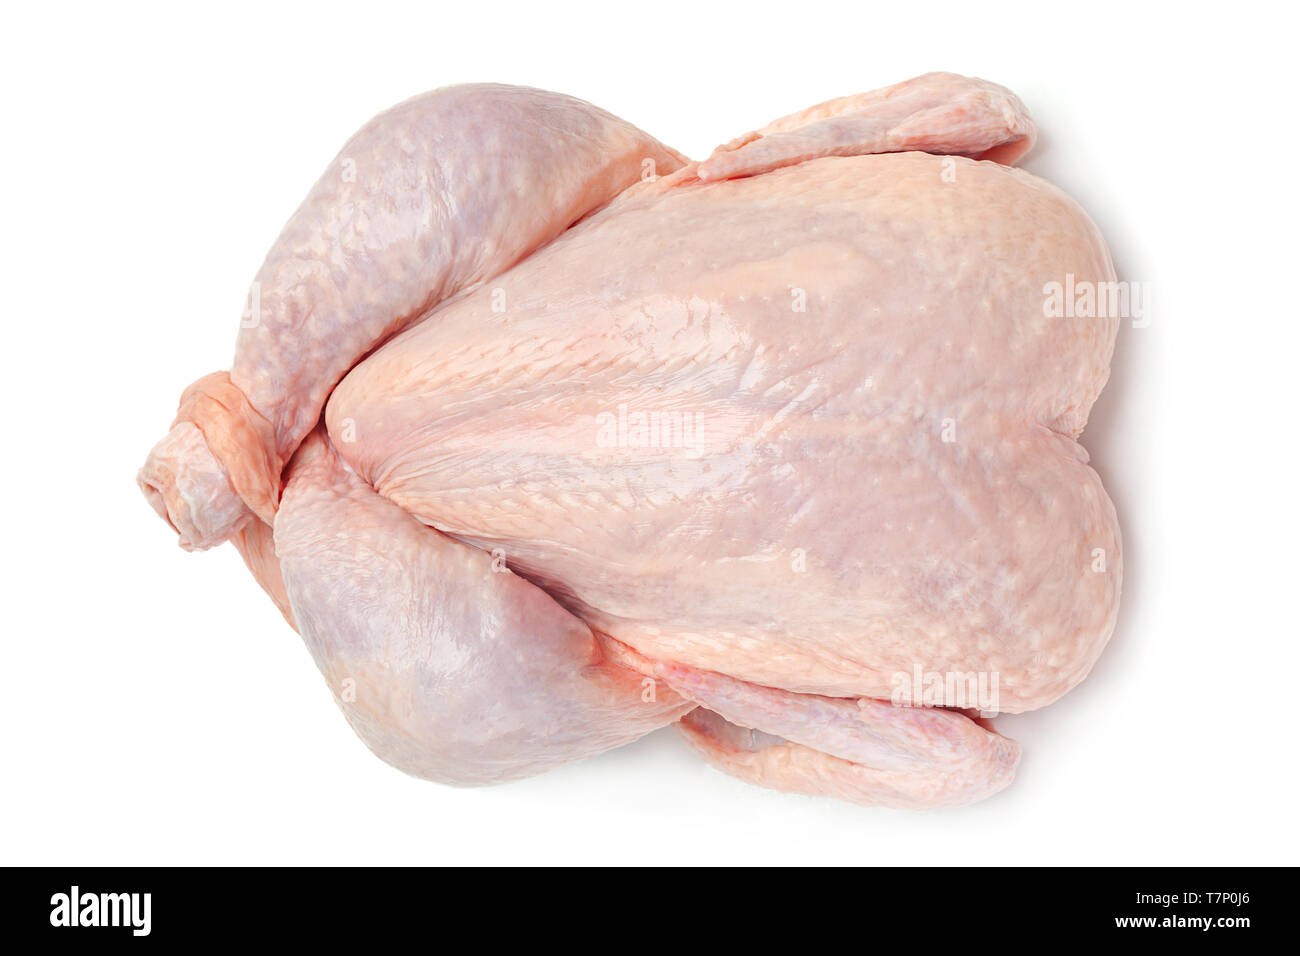 Raw chicken body isolated on white background Stock Photo - Alamy